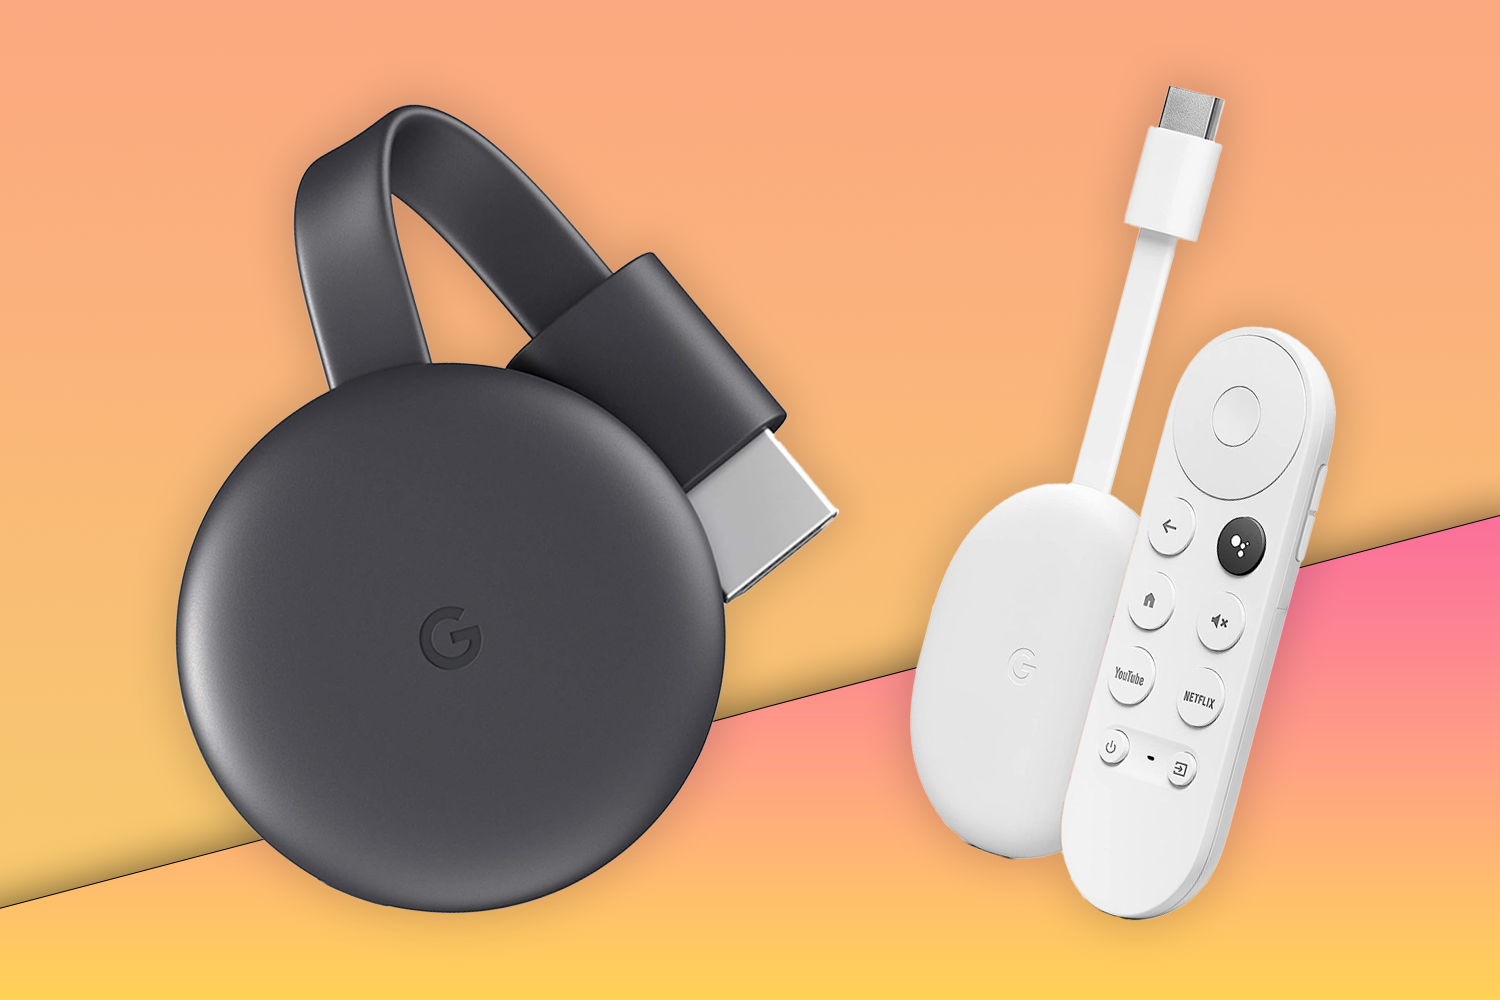 Google Chromecast - Cast to your TV in HD, Android Streaming Stick